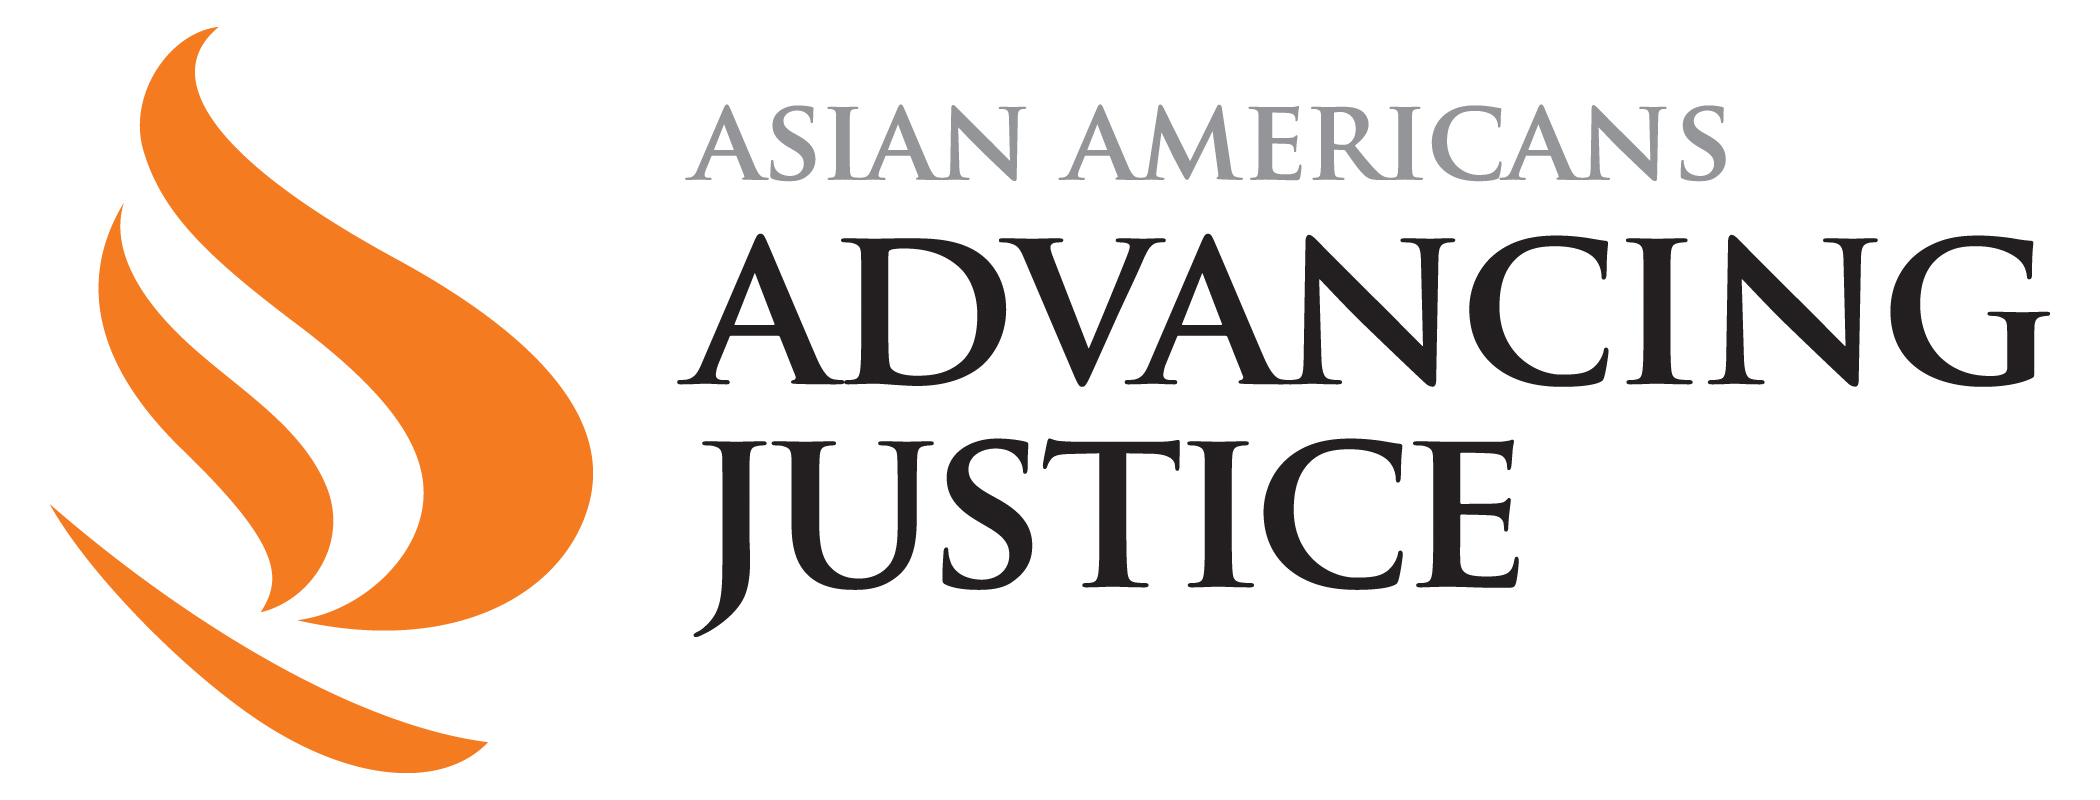 Asian Justice 37